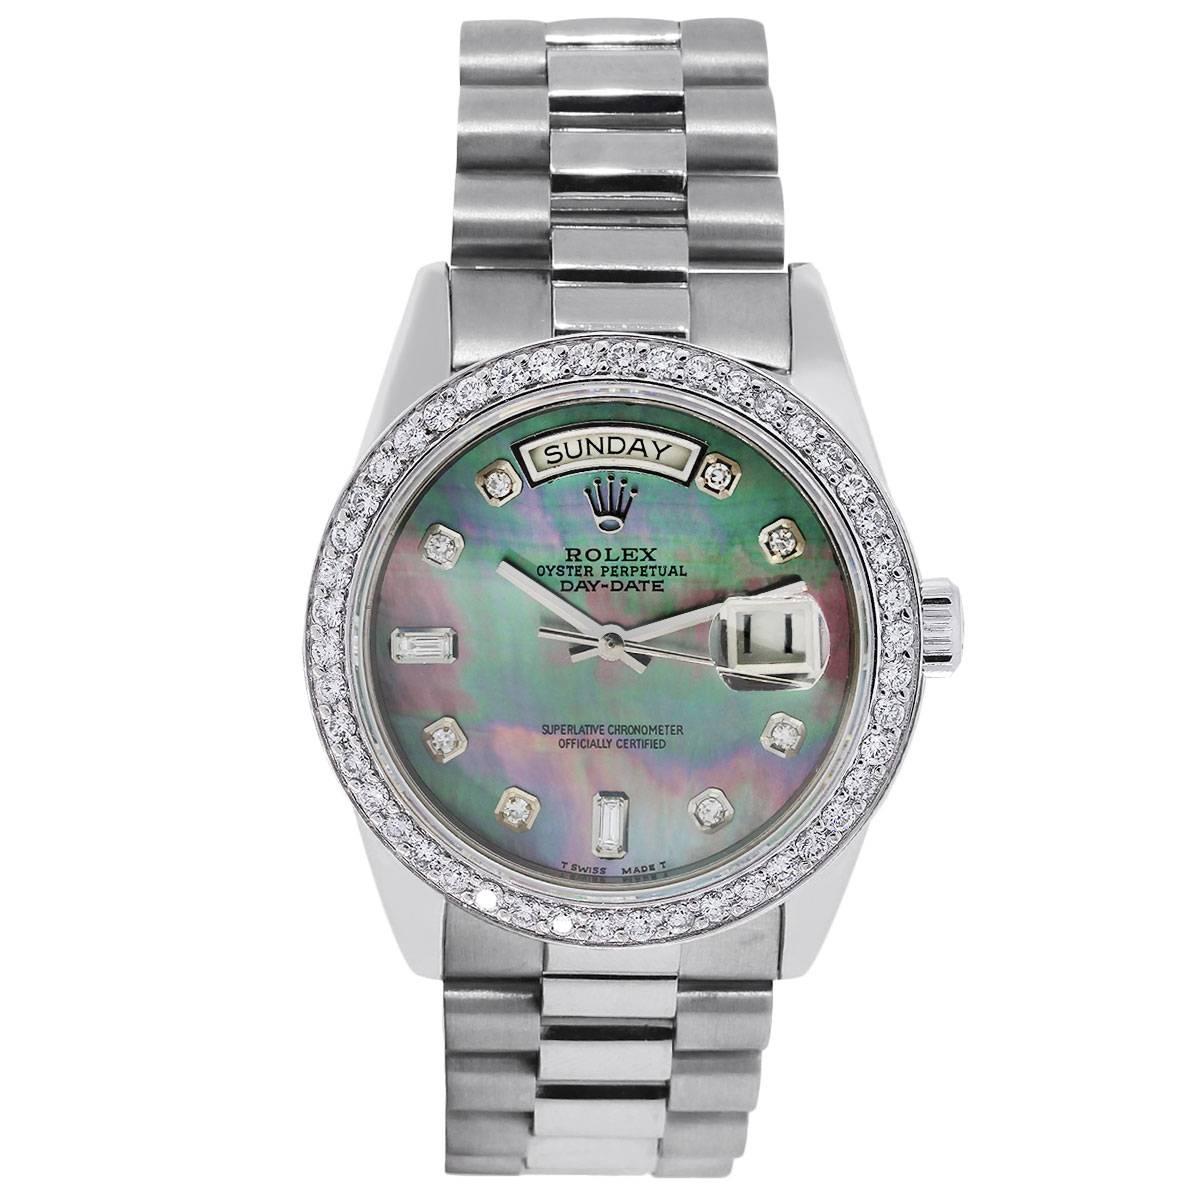 Brand: Rolex
MPN: 18039 
Model: Day-Date presidential
Case Material: 18k White Gold
Case Diameter: 34mm
Crystal: Scratch resistant sapphire
Bezel: 18k white gold diamond bezel
Dial: Tahitian mother of pearl dial with diamond hour markers. Day